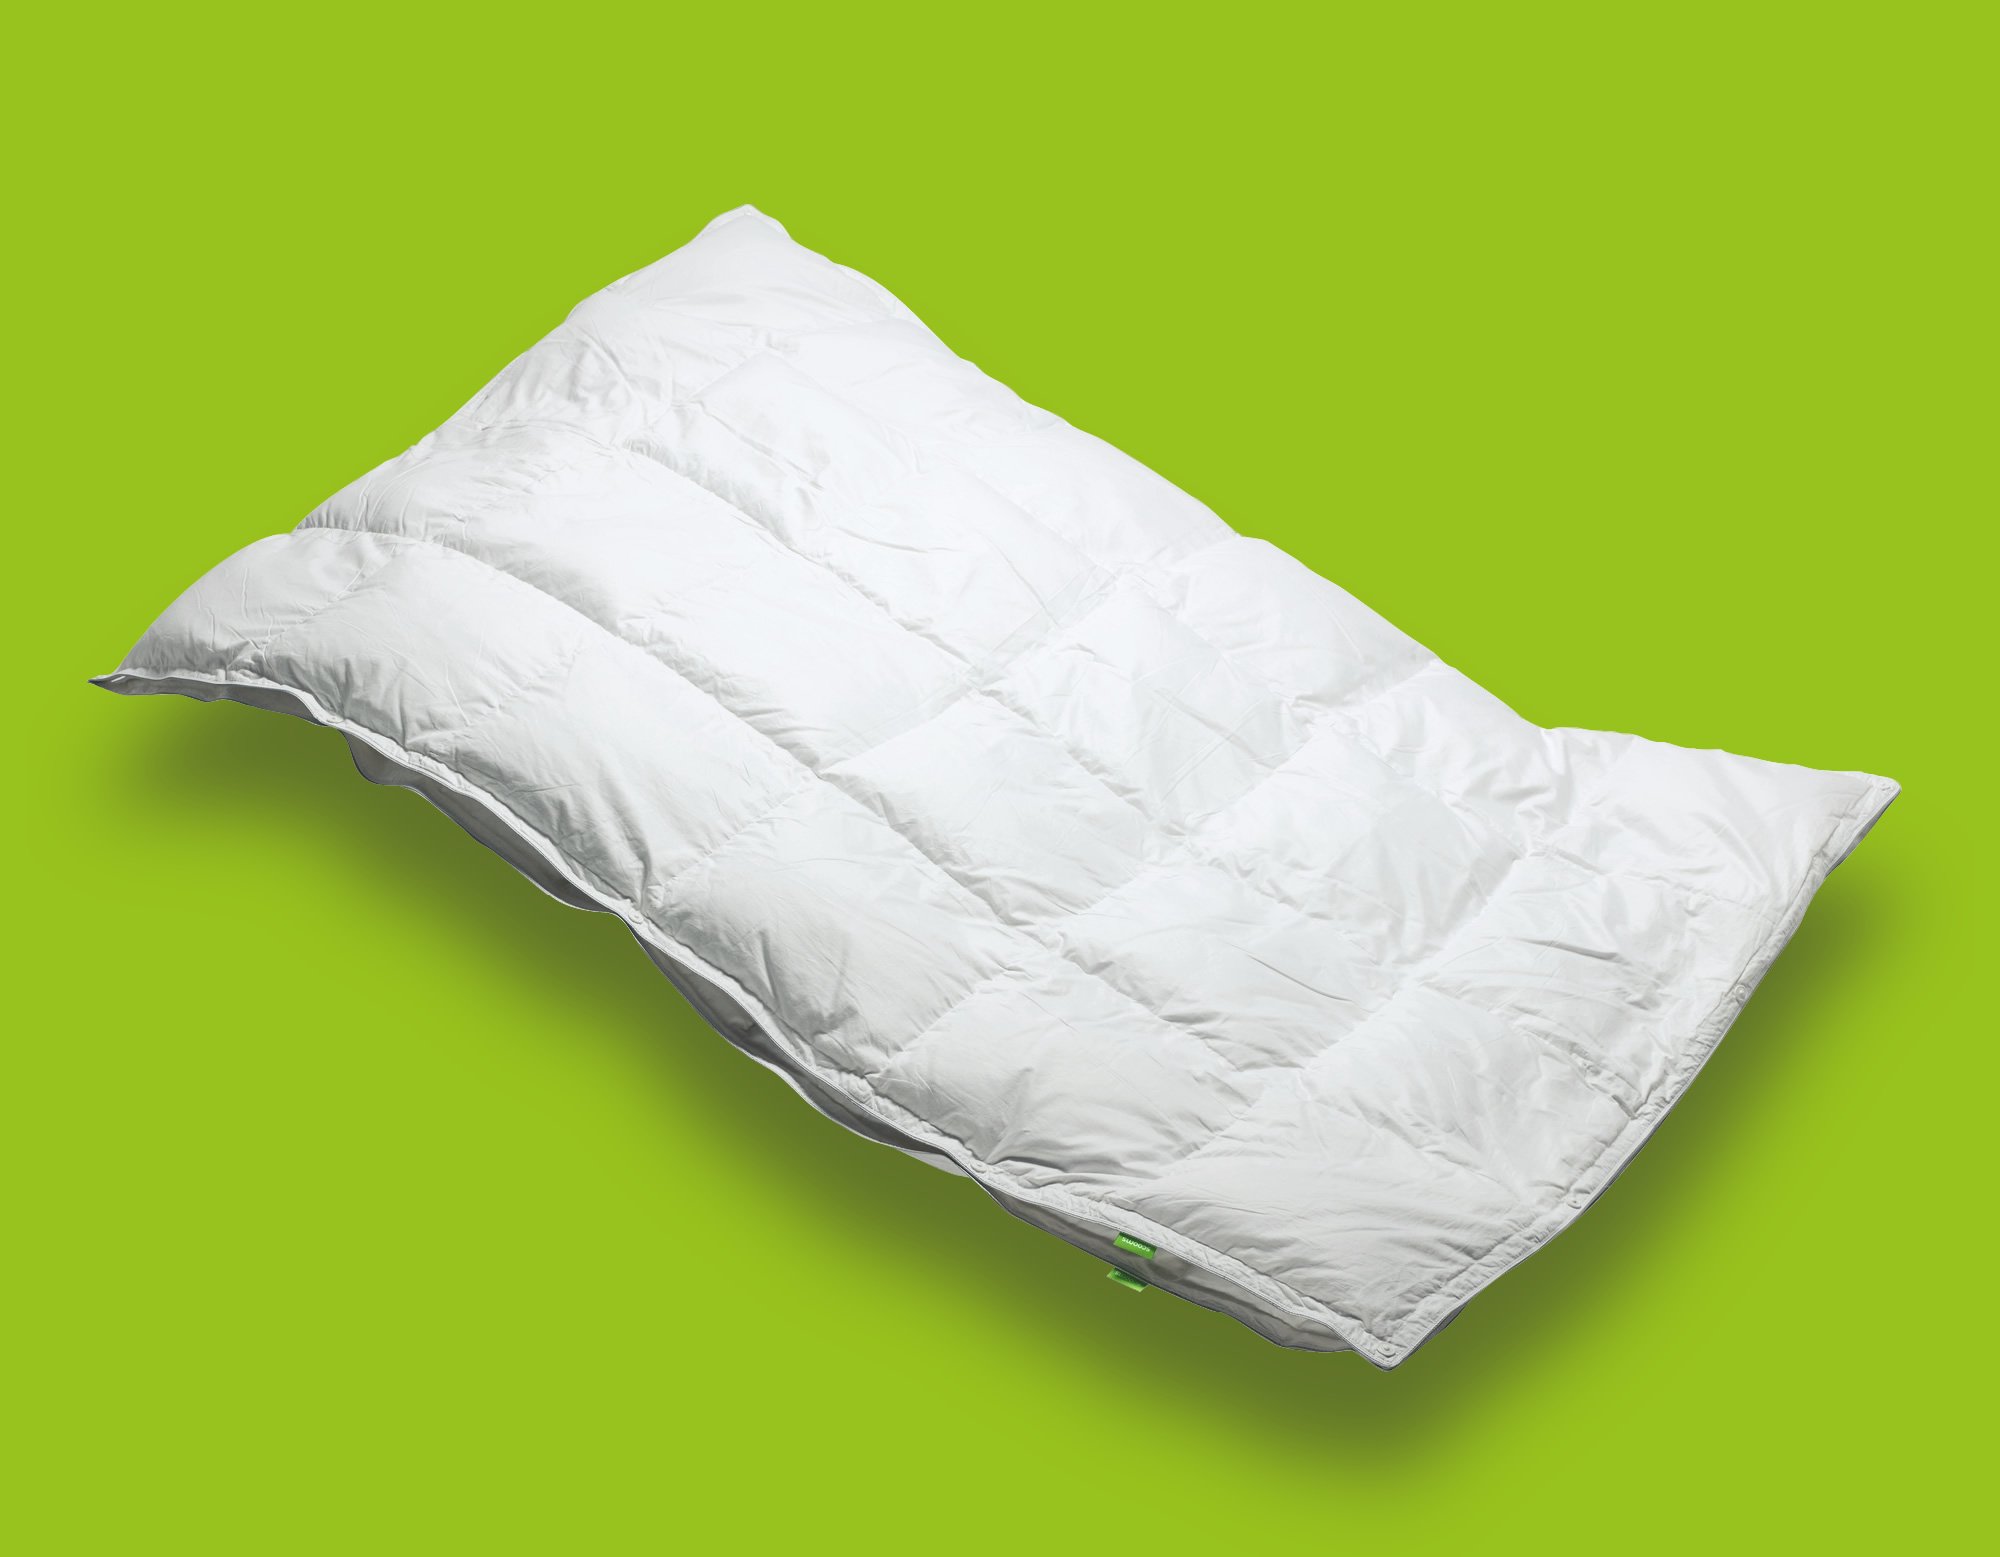 What Is the Best Quality of Bedding to Get a Comfortable Sleep?